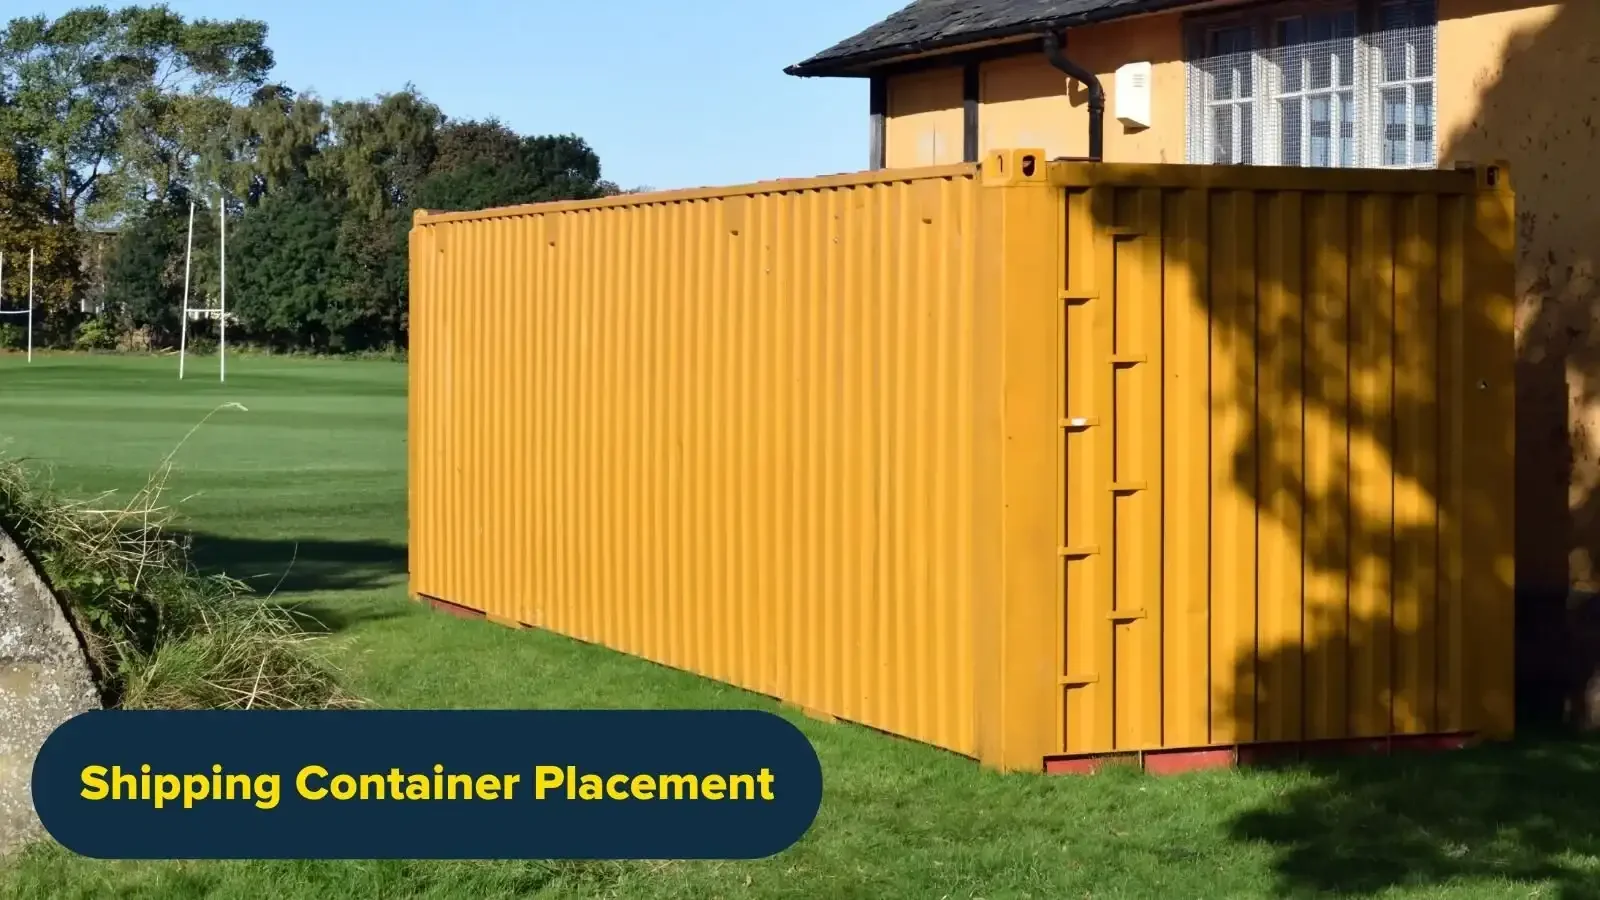 A yellow one-trip shipping container placed on grass. Graphic reads "Shipping Container Placement".